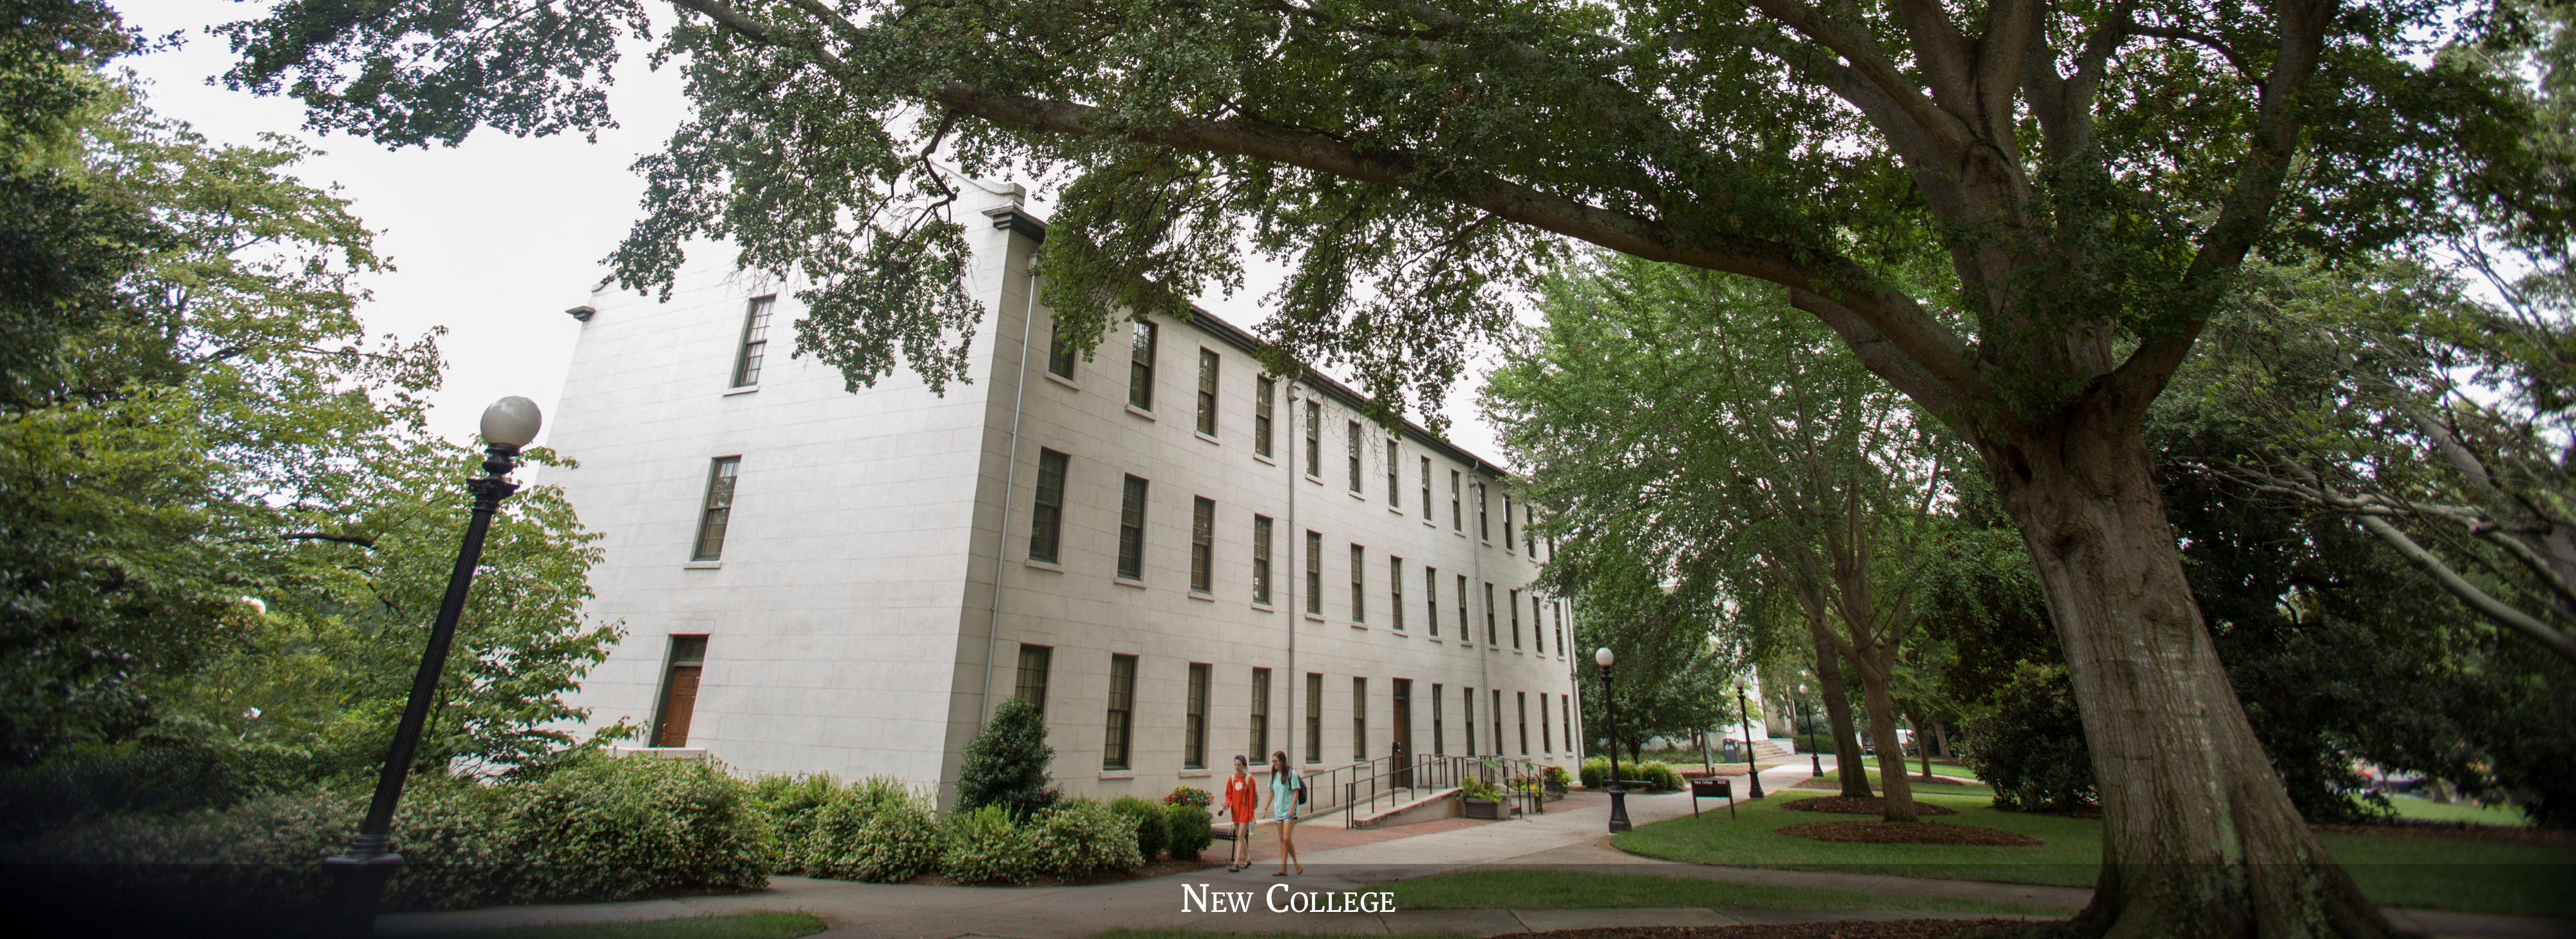 The Office of Faculty Affairs is located in New College on historic North Campus.